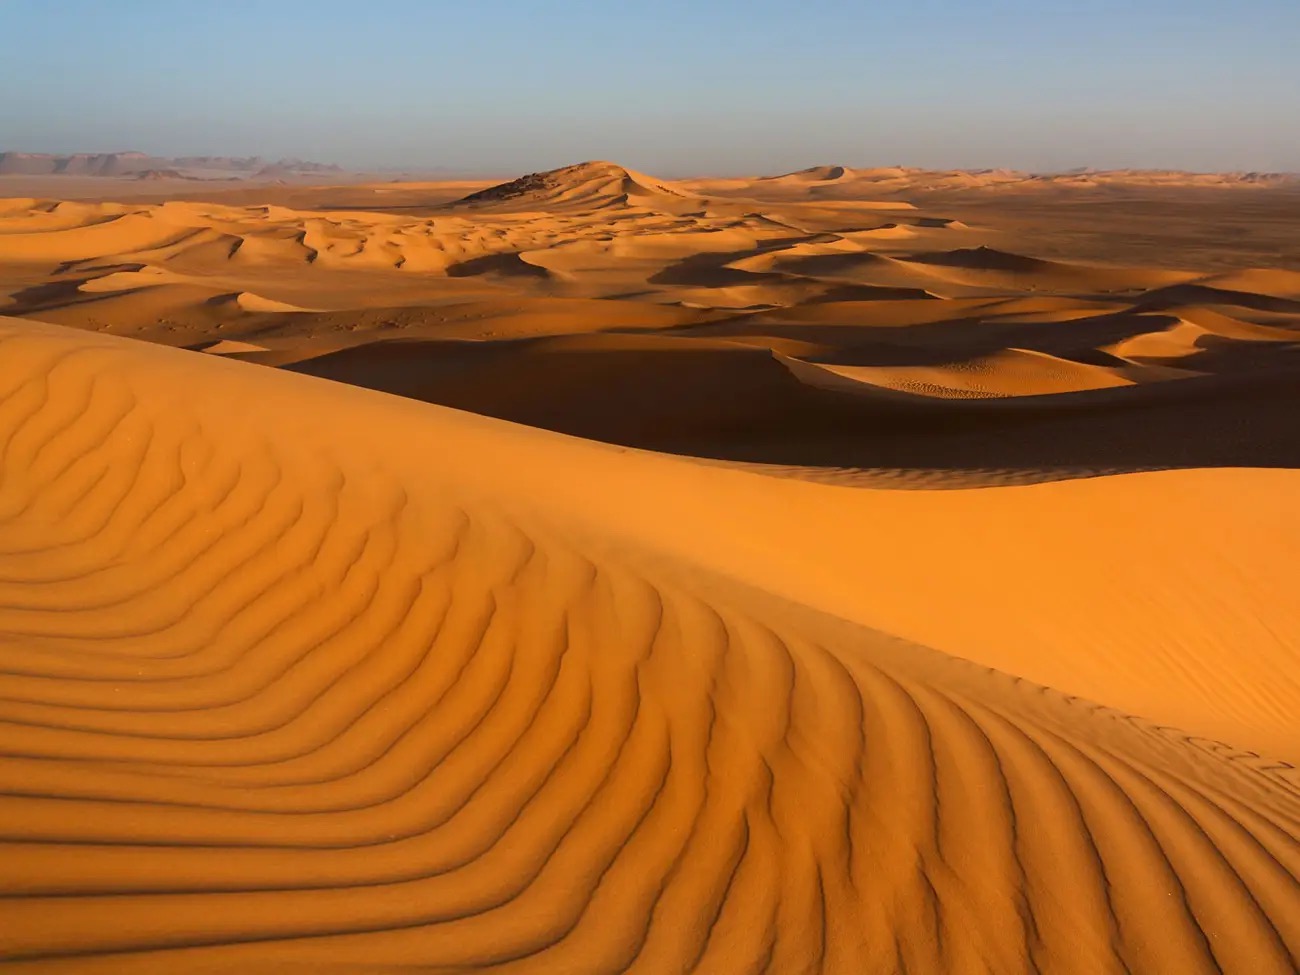 Can You Match These Natural Wonders to Their Locations? Sahara desert, Africa